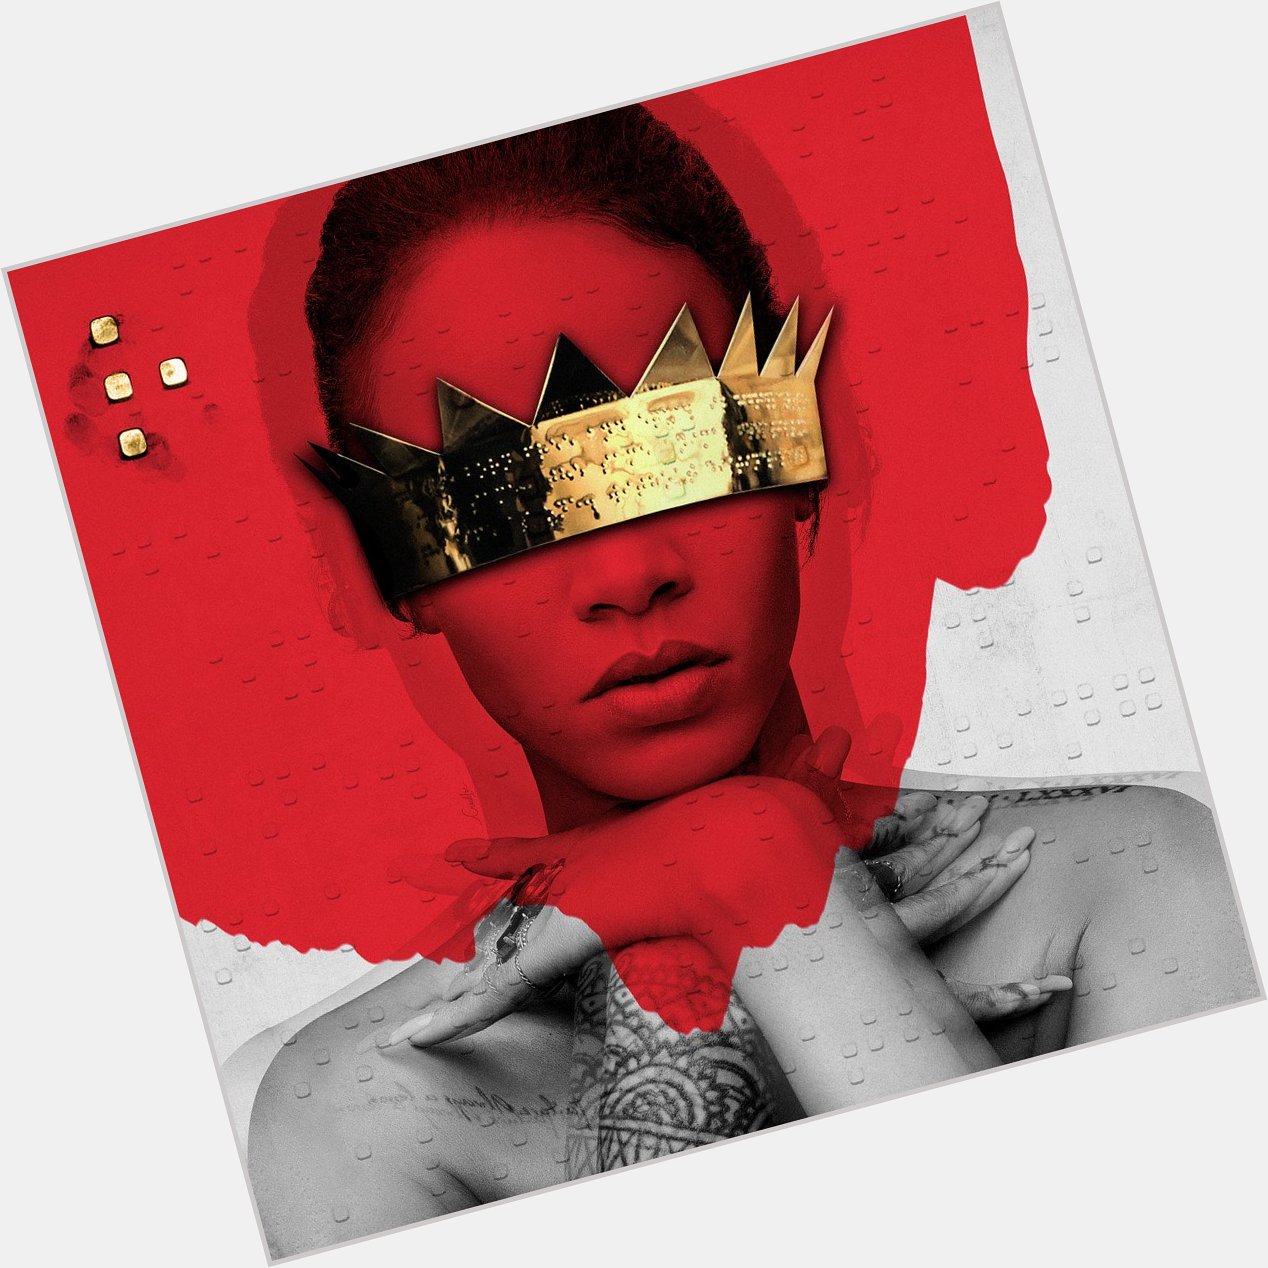  today it\s been 2 years since you released ANTI   Happy Birthday ANTI 